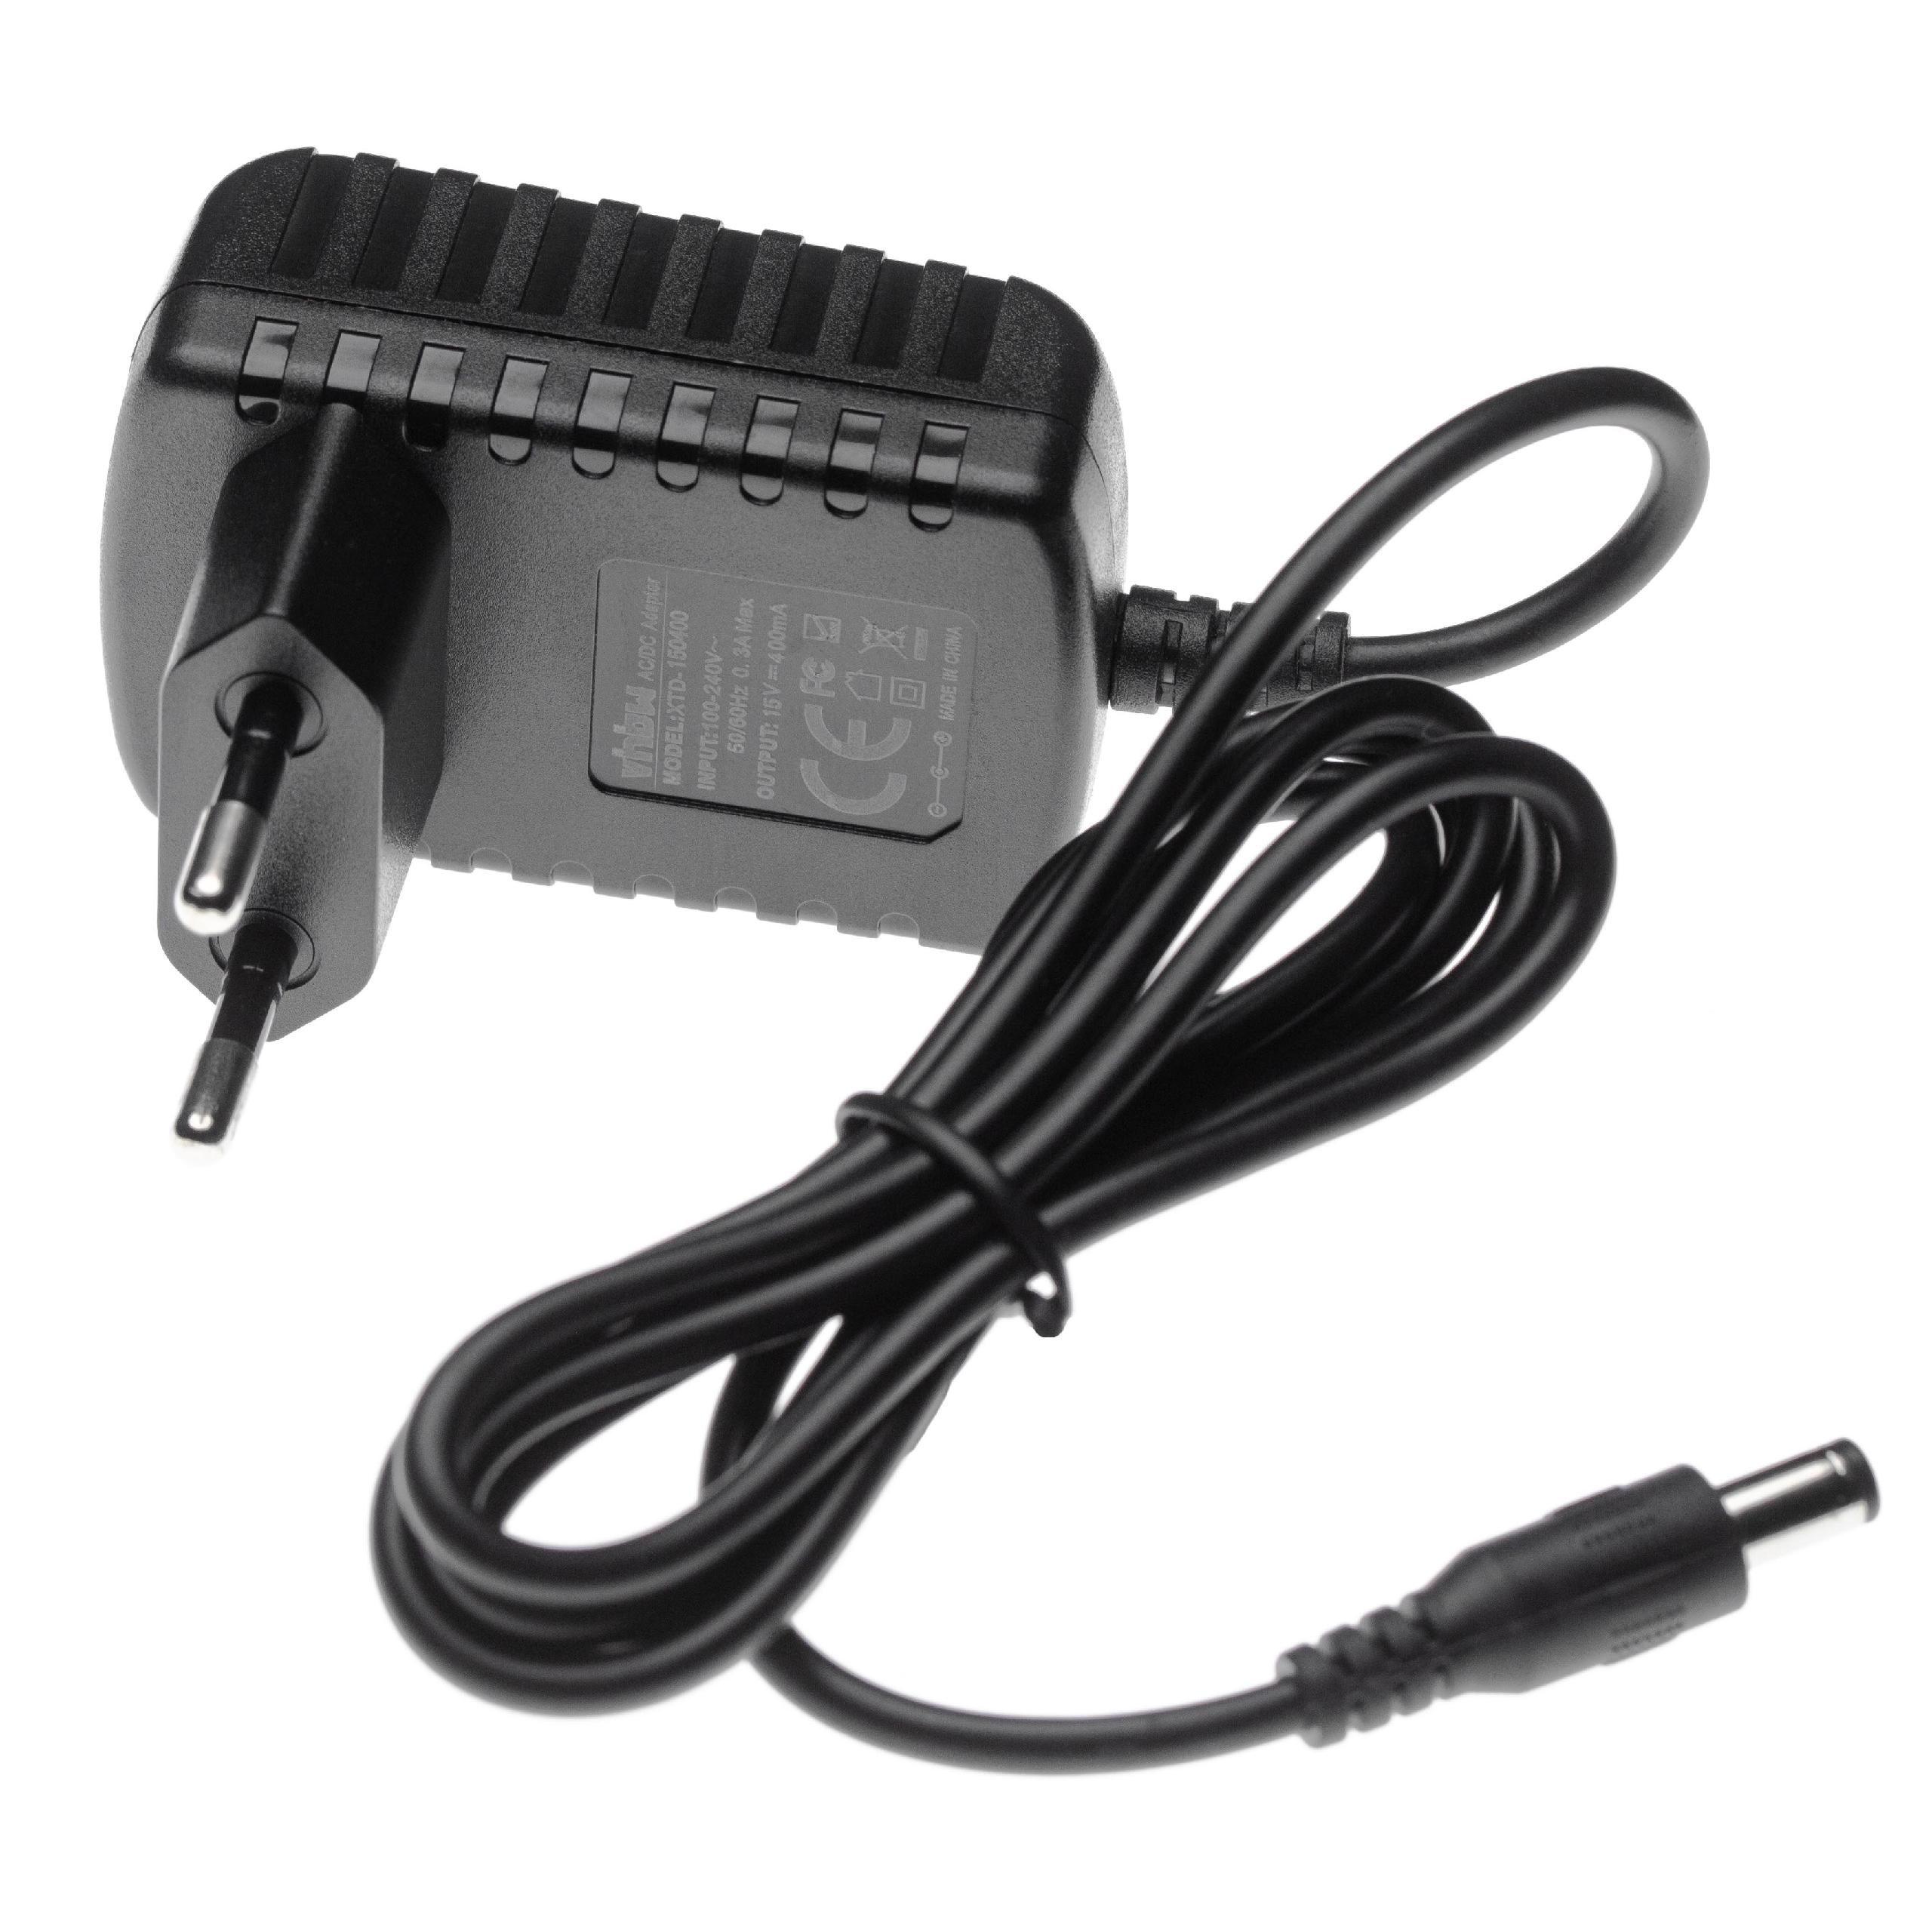 Mains Power Adapter replaces Bosch 2610Z06585 for Bosch Power Tool - 114.5 cm